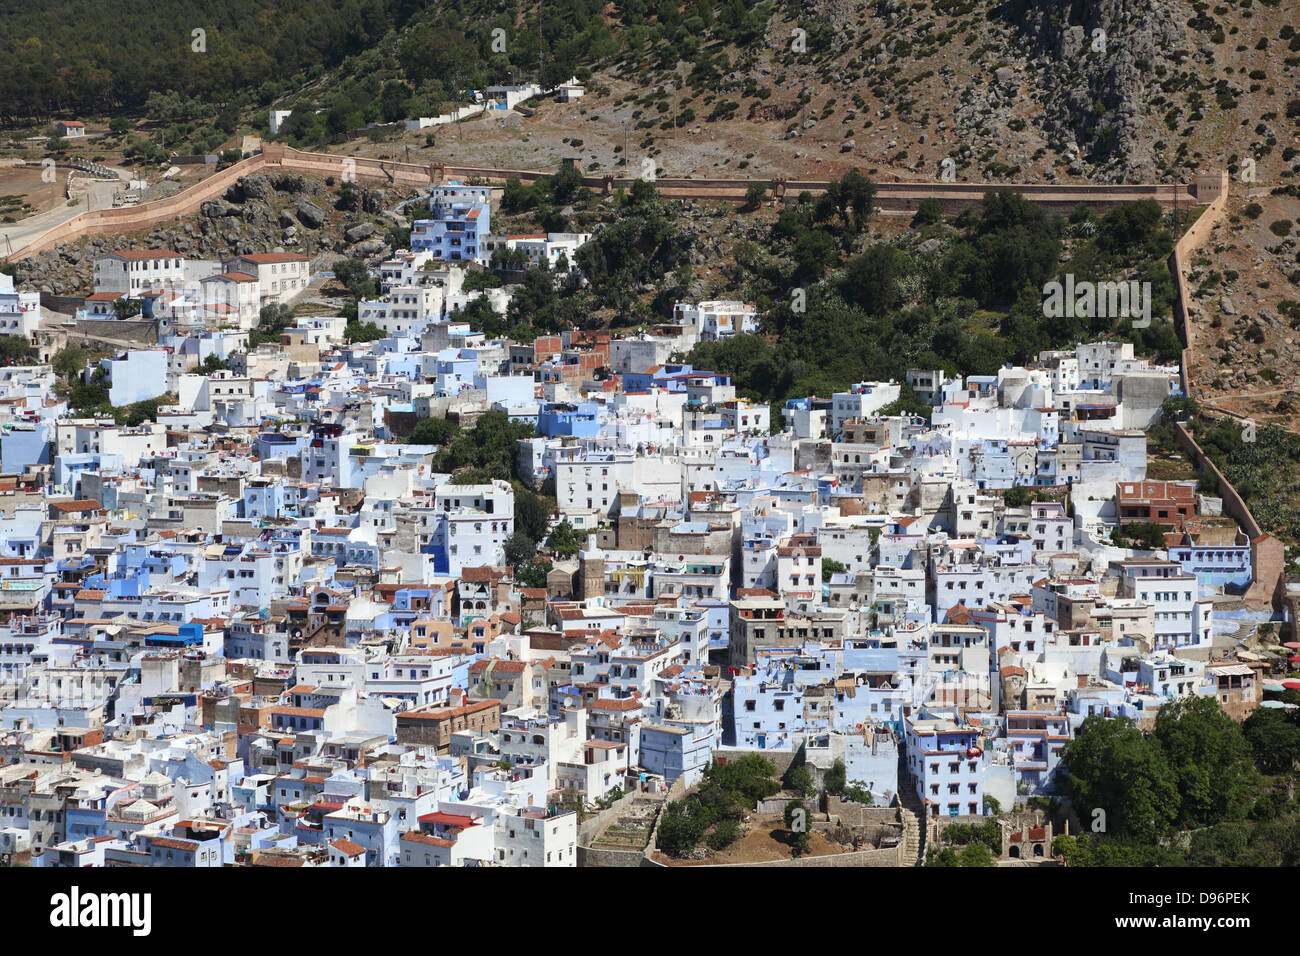 View of the colorful town Chefchaouen in Morocco Stock Photo